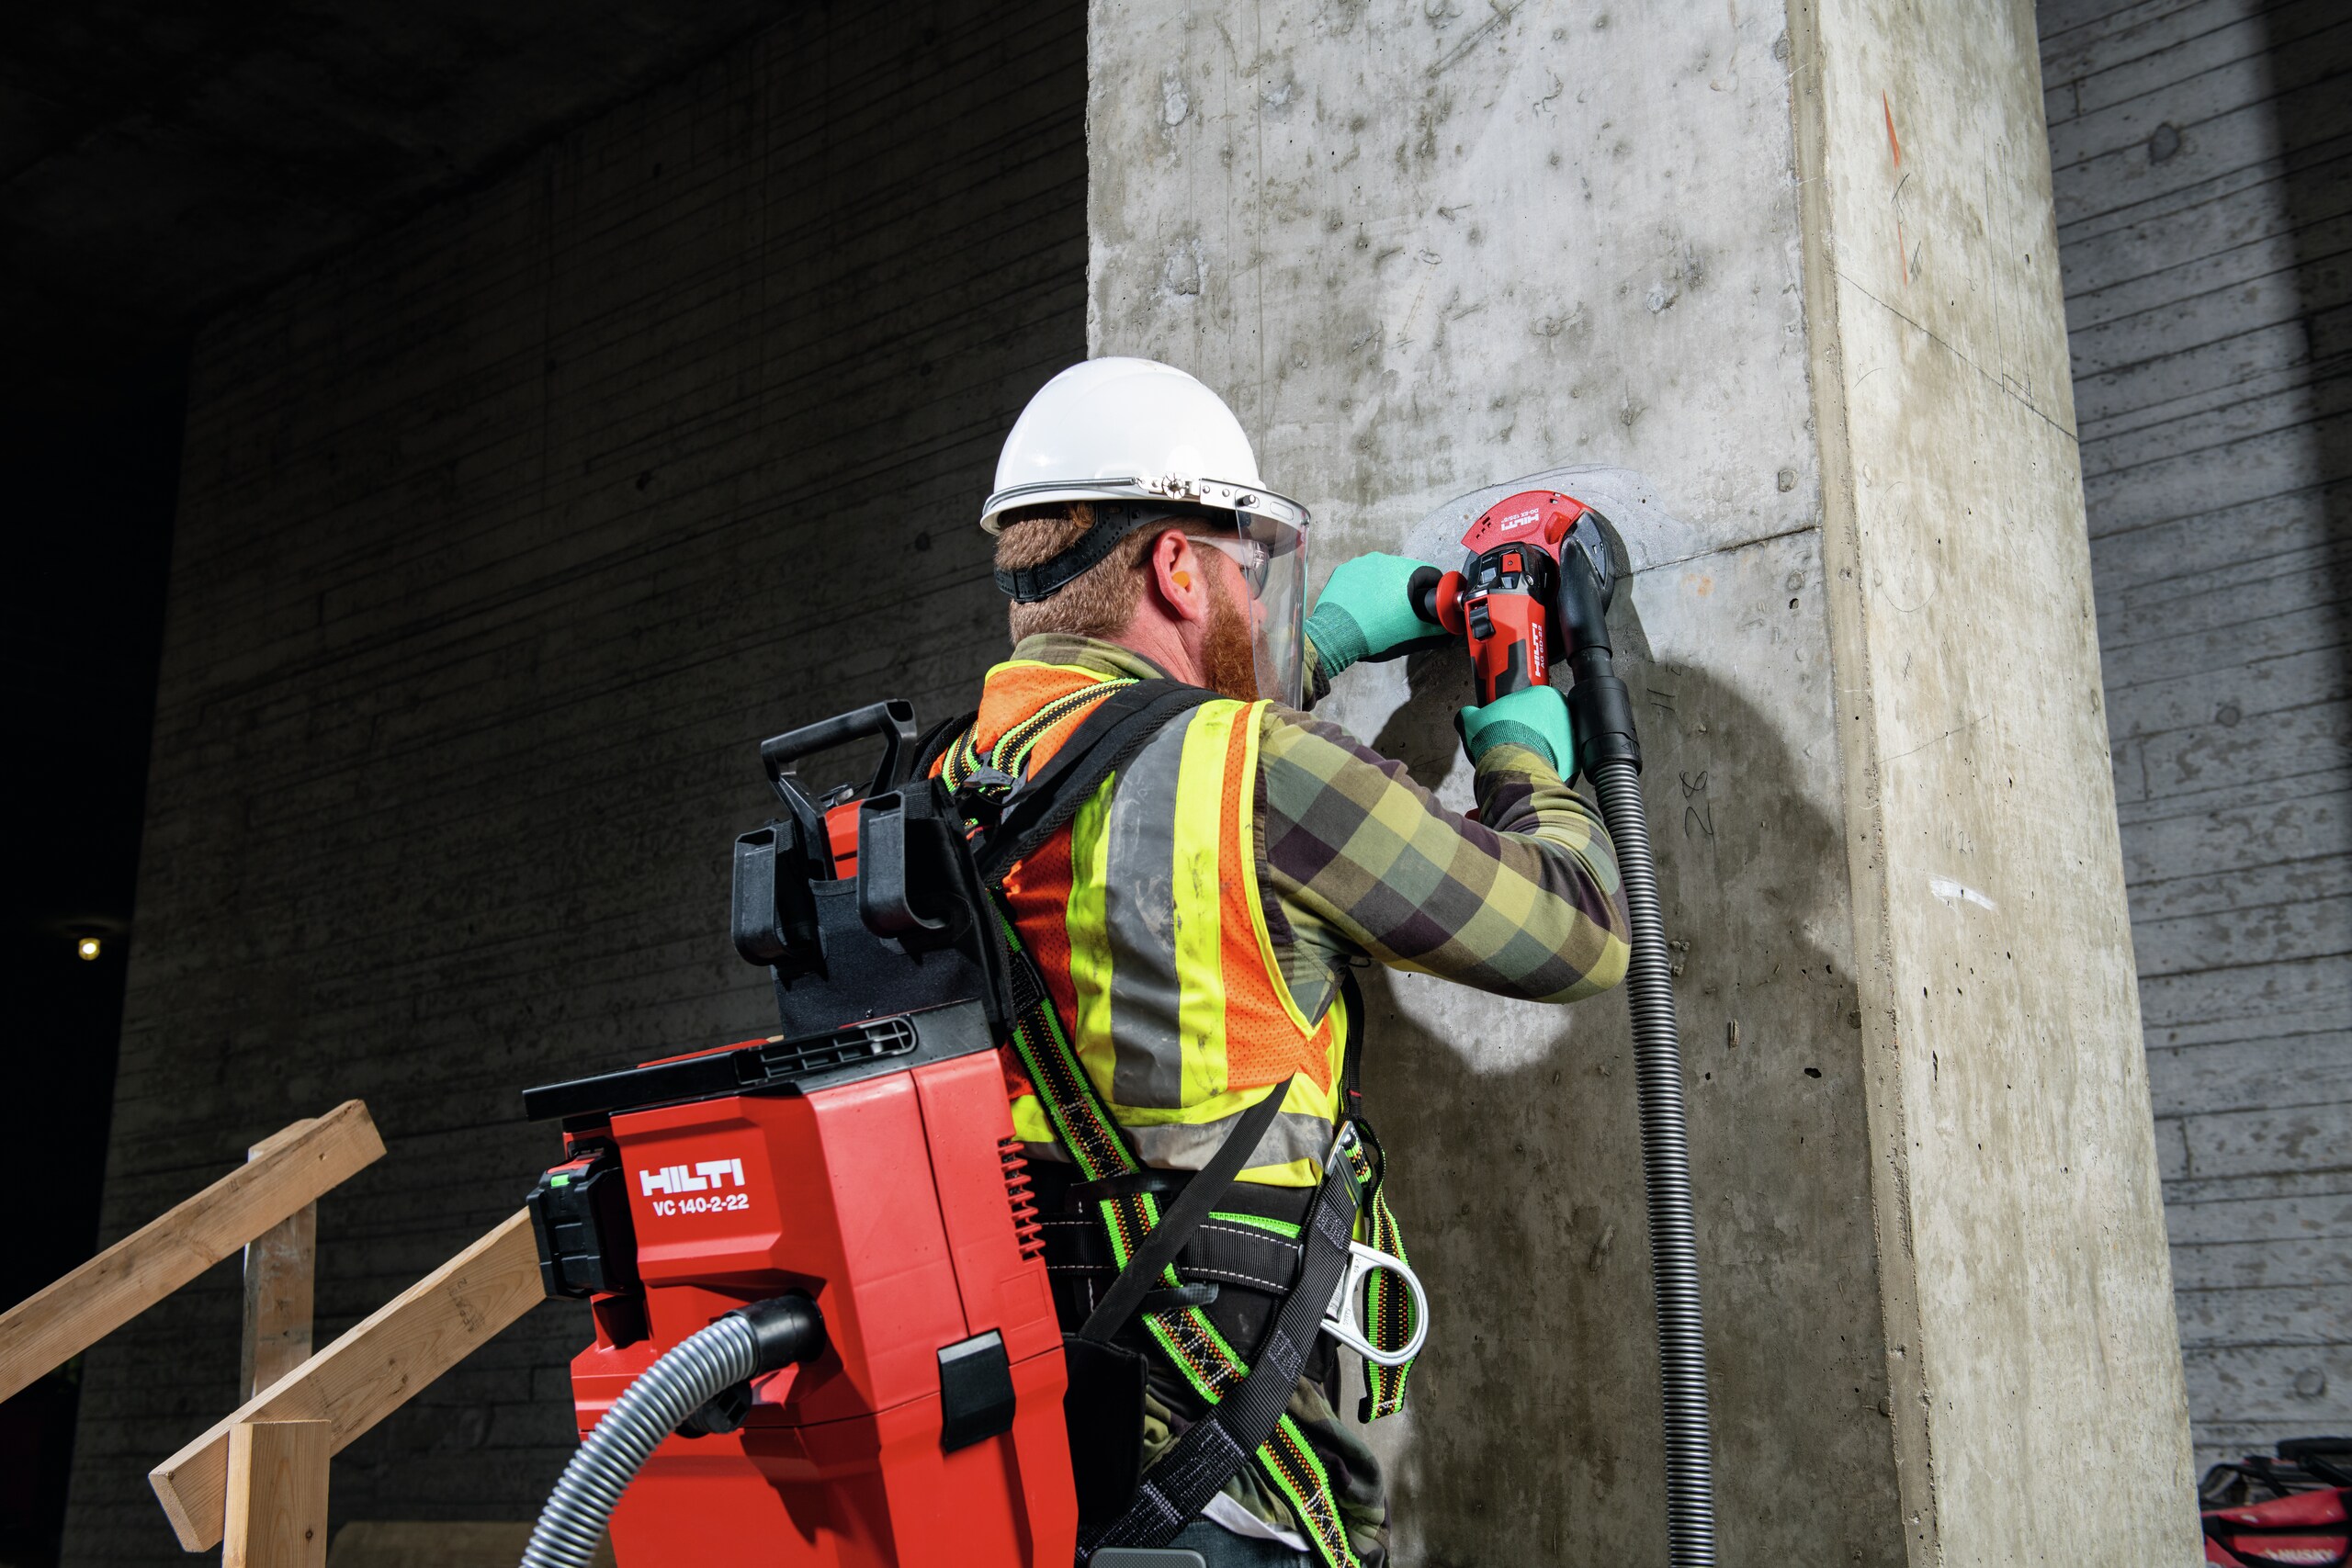 Make your jobsite safer with the new Hilti VC 10M-22 Cordless Dust Extractor